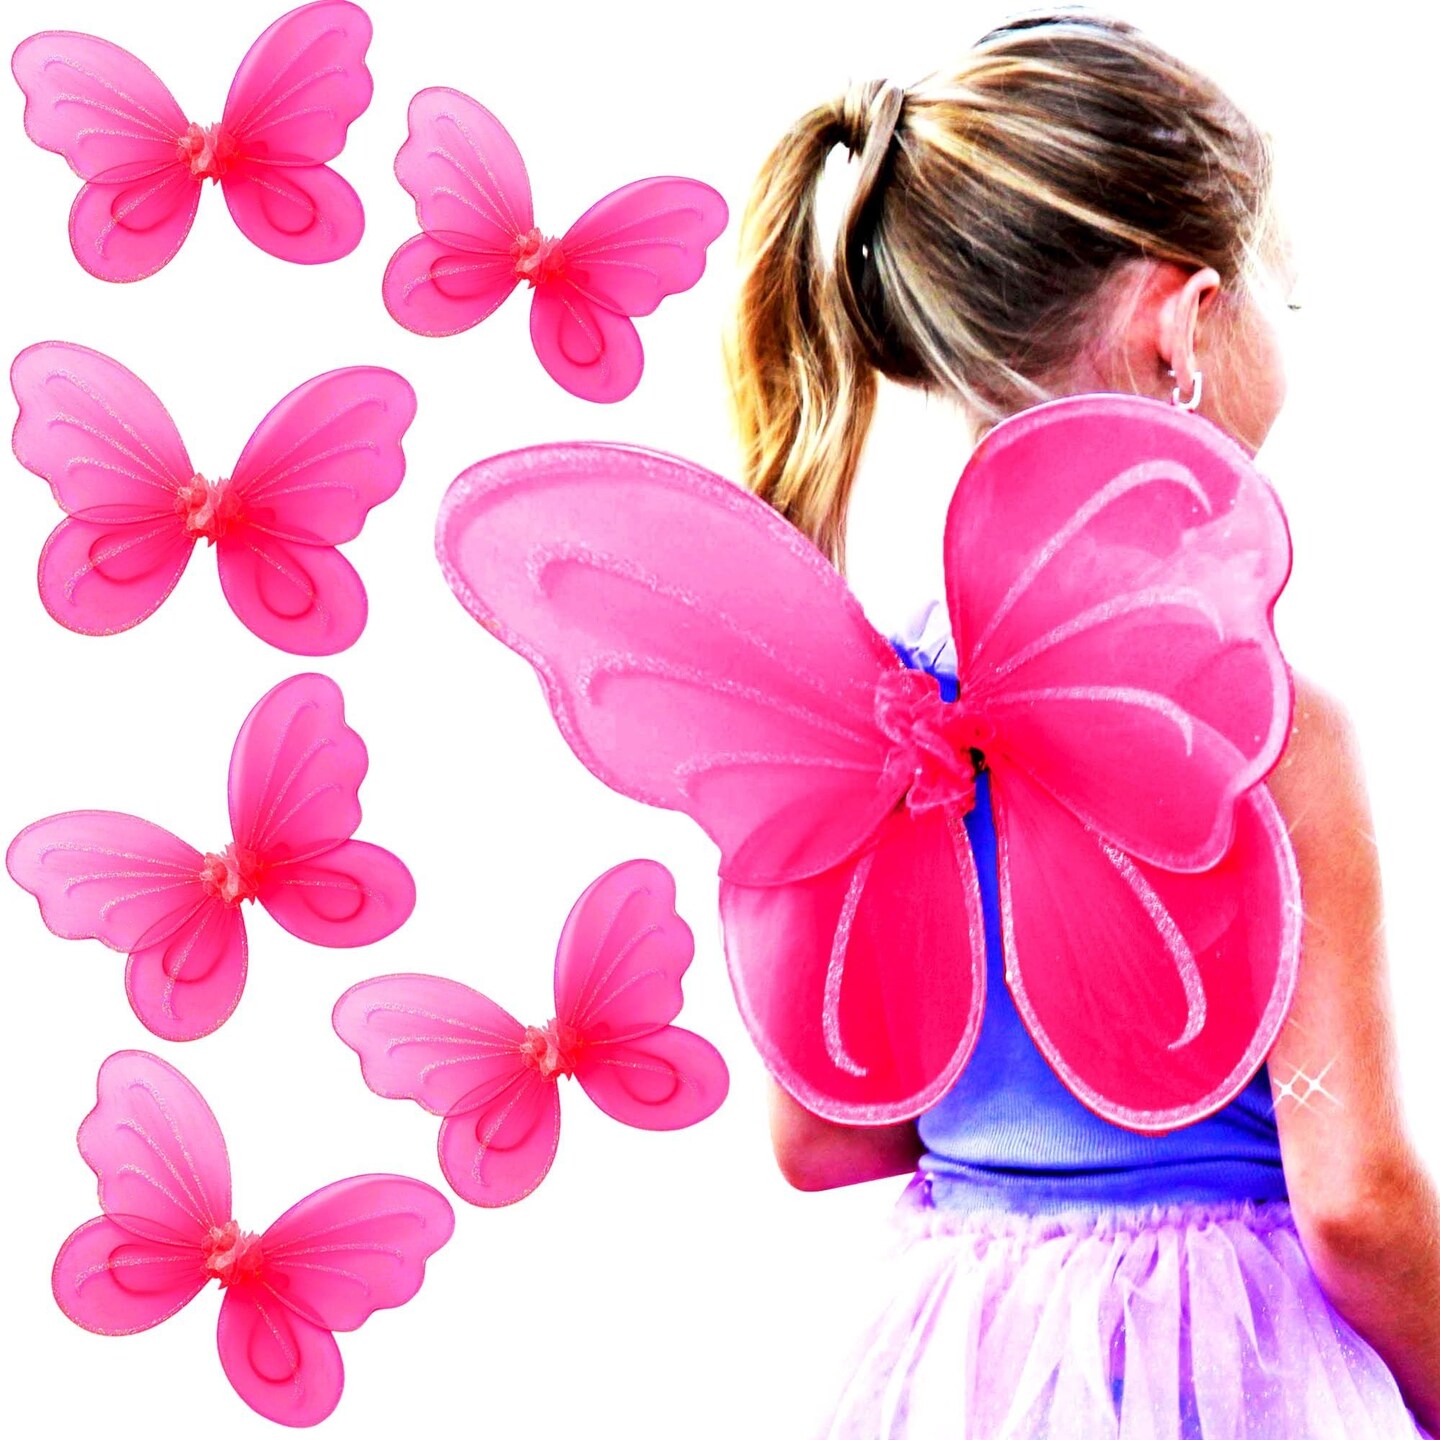 Butterfly Craze Girls&#x27; Fairy, Angel, or Butterfly Wings Costumes &#x26; Dress Up Collection: Set of 6, Magical Delights, Favors or Supplies for Kids, Make Your Little One&#x27;s Birthday Party Special, Hot Pink